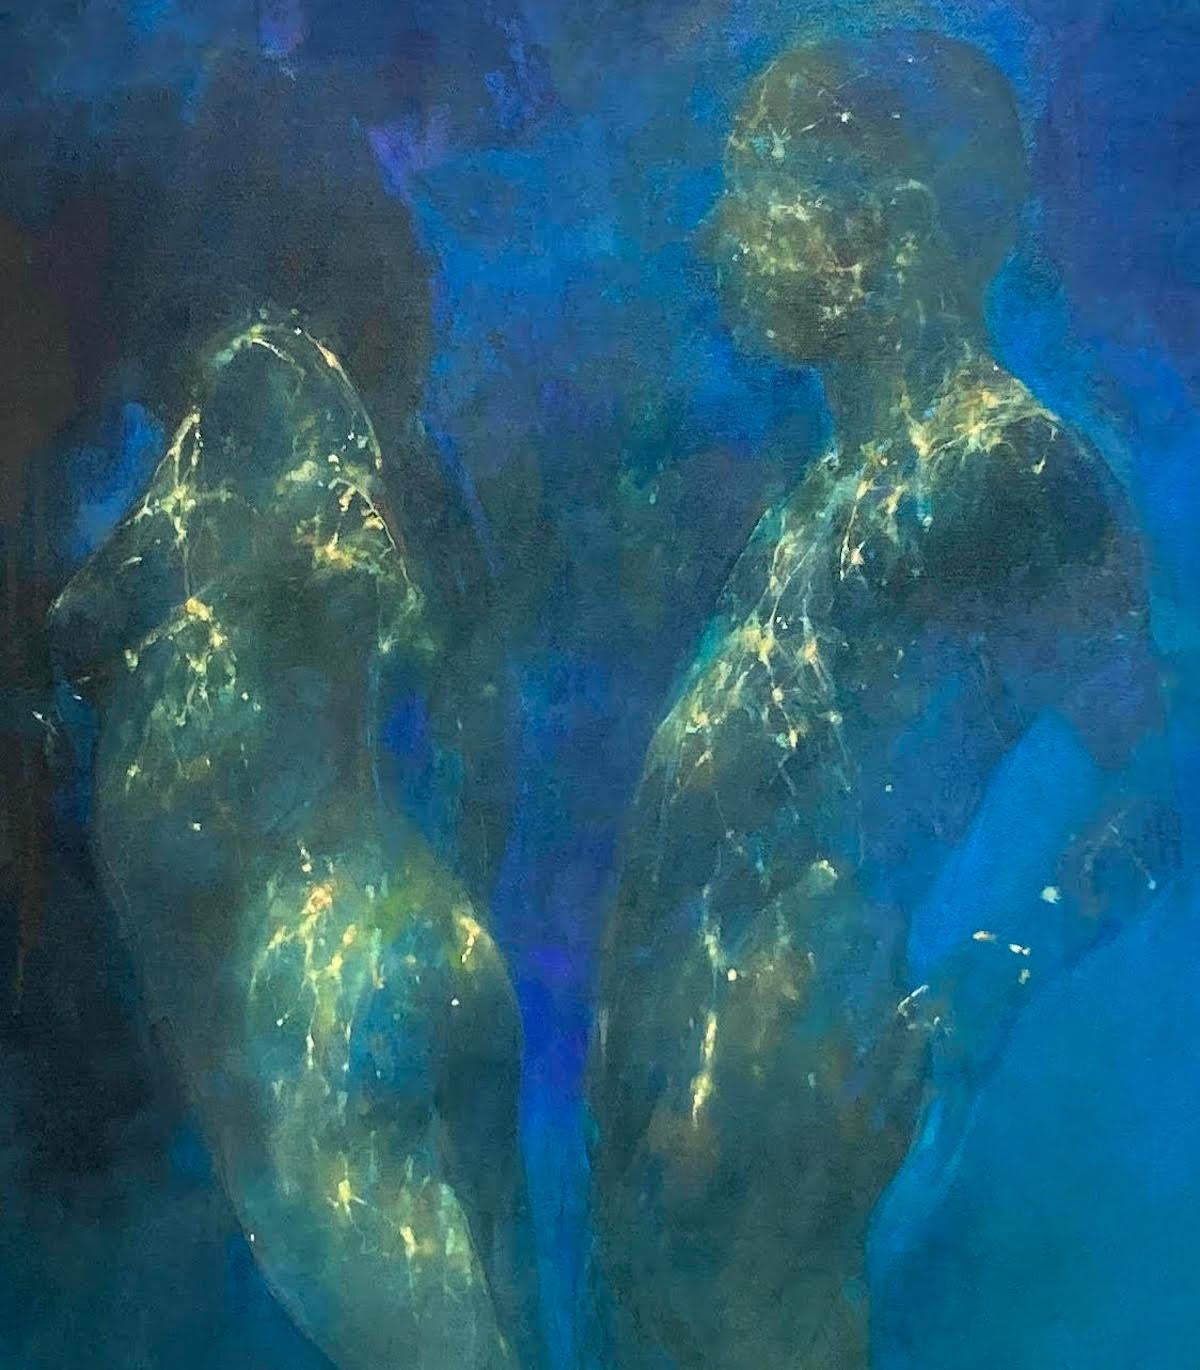 Reflections by Bill Bate [2022]

original
Oil on Canvas
Image size: H:122 cm x W:92 cm
Complete Size of Unframed Work: H:122 cm x W:92 cm x D:3cm
Sold Unframed
Please note that insitu images are purely an indication of how a piece may